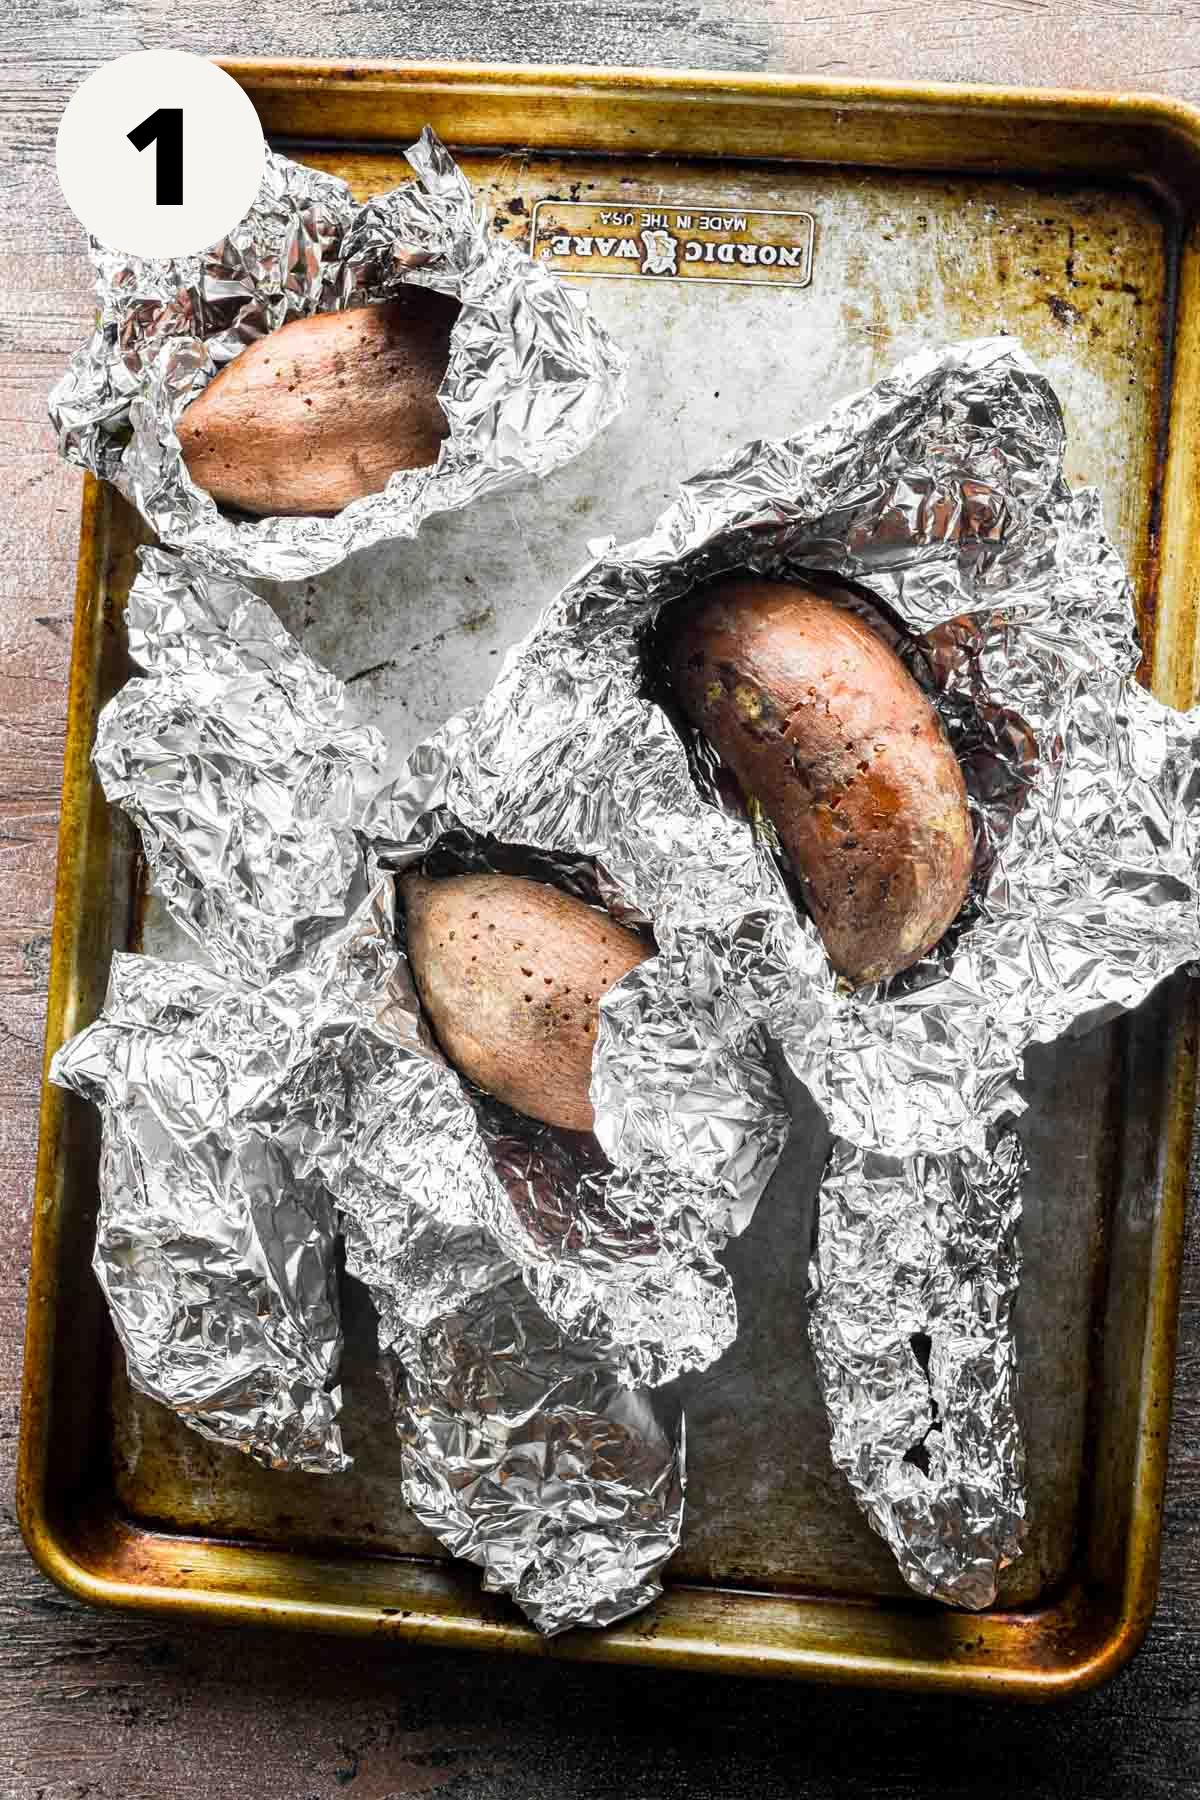 Wrapped sweet potatoes on a sheet tray.